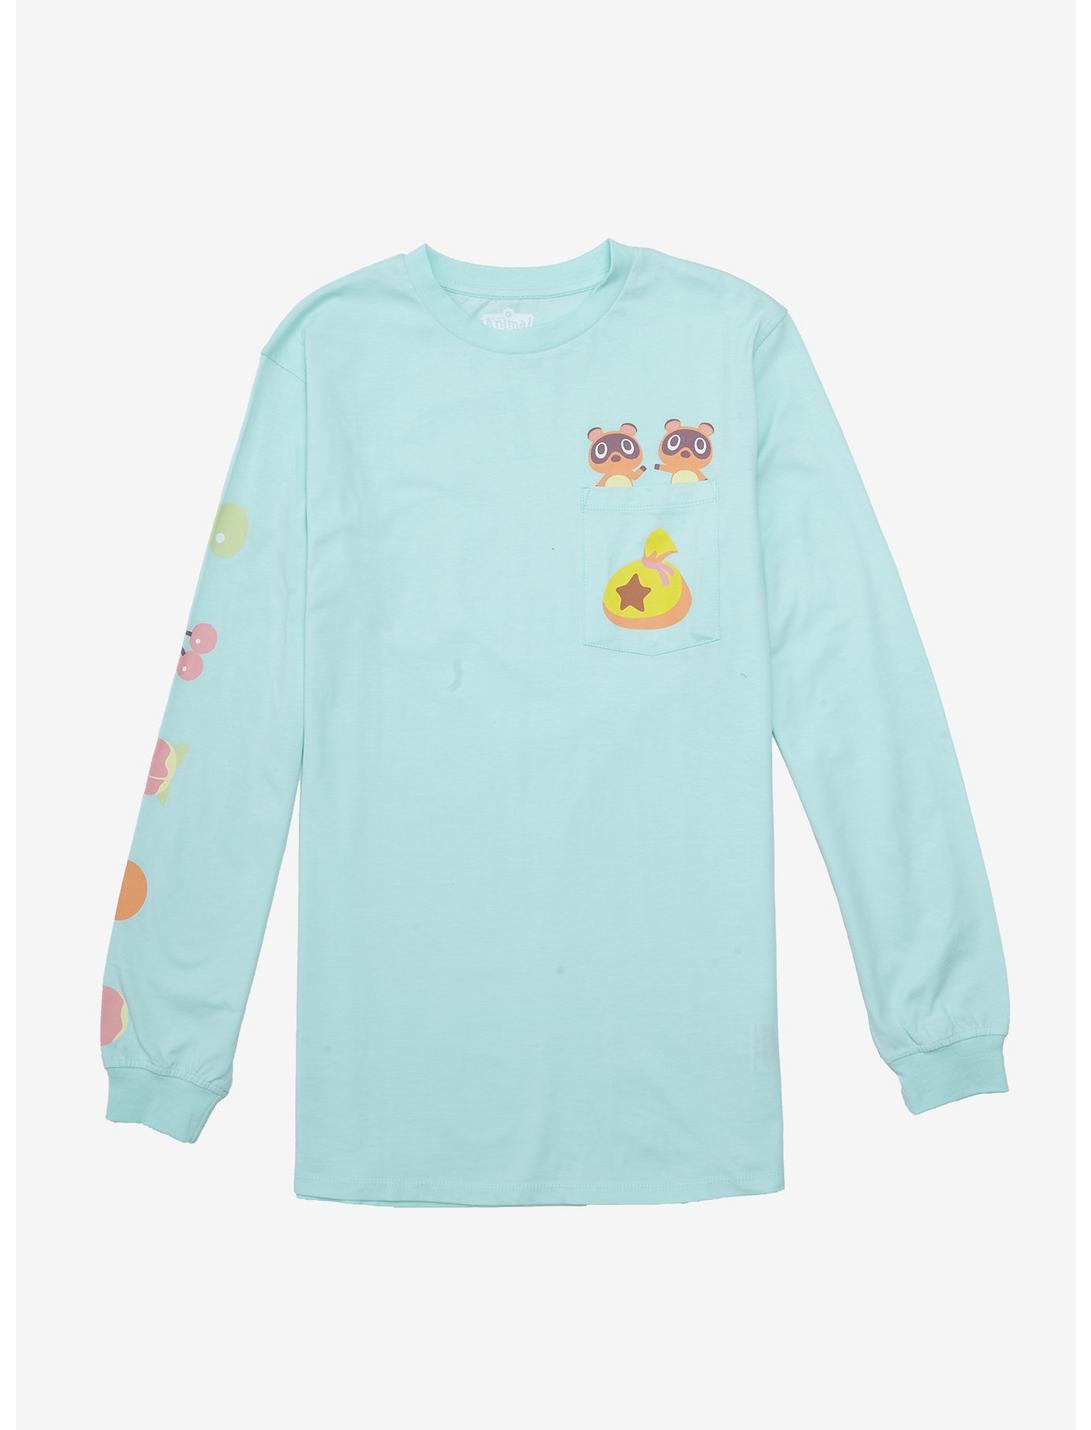 Cakeworthy Nintendo Animal Crossing Timmy & Tommy Pocket Long Sleeve T-Shirt - BoxLunch Exclusive, BLUE, hi-res